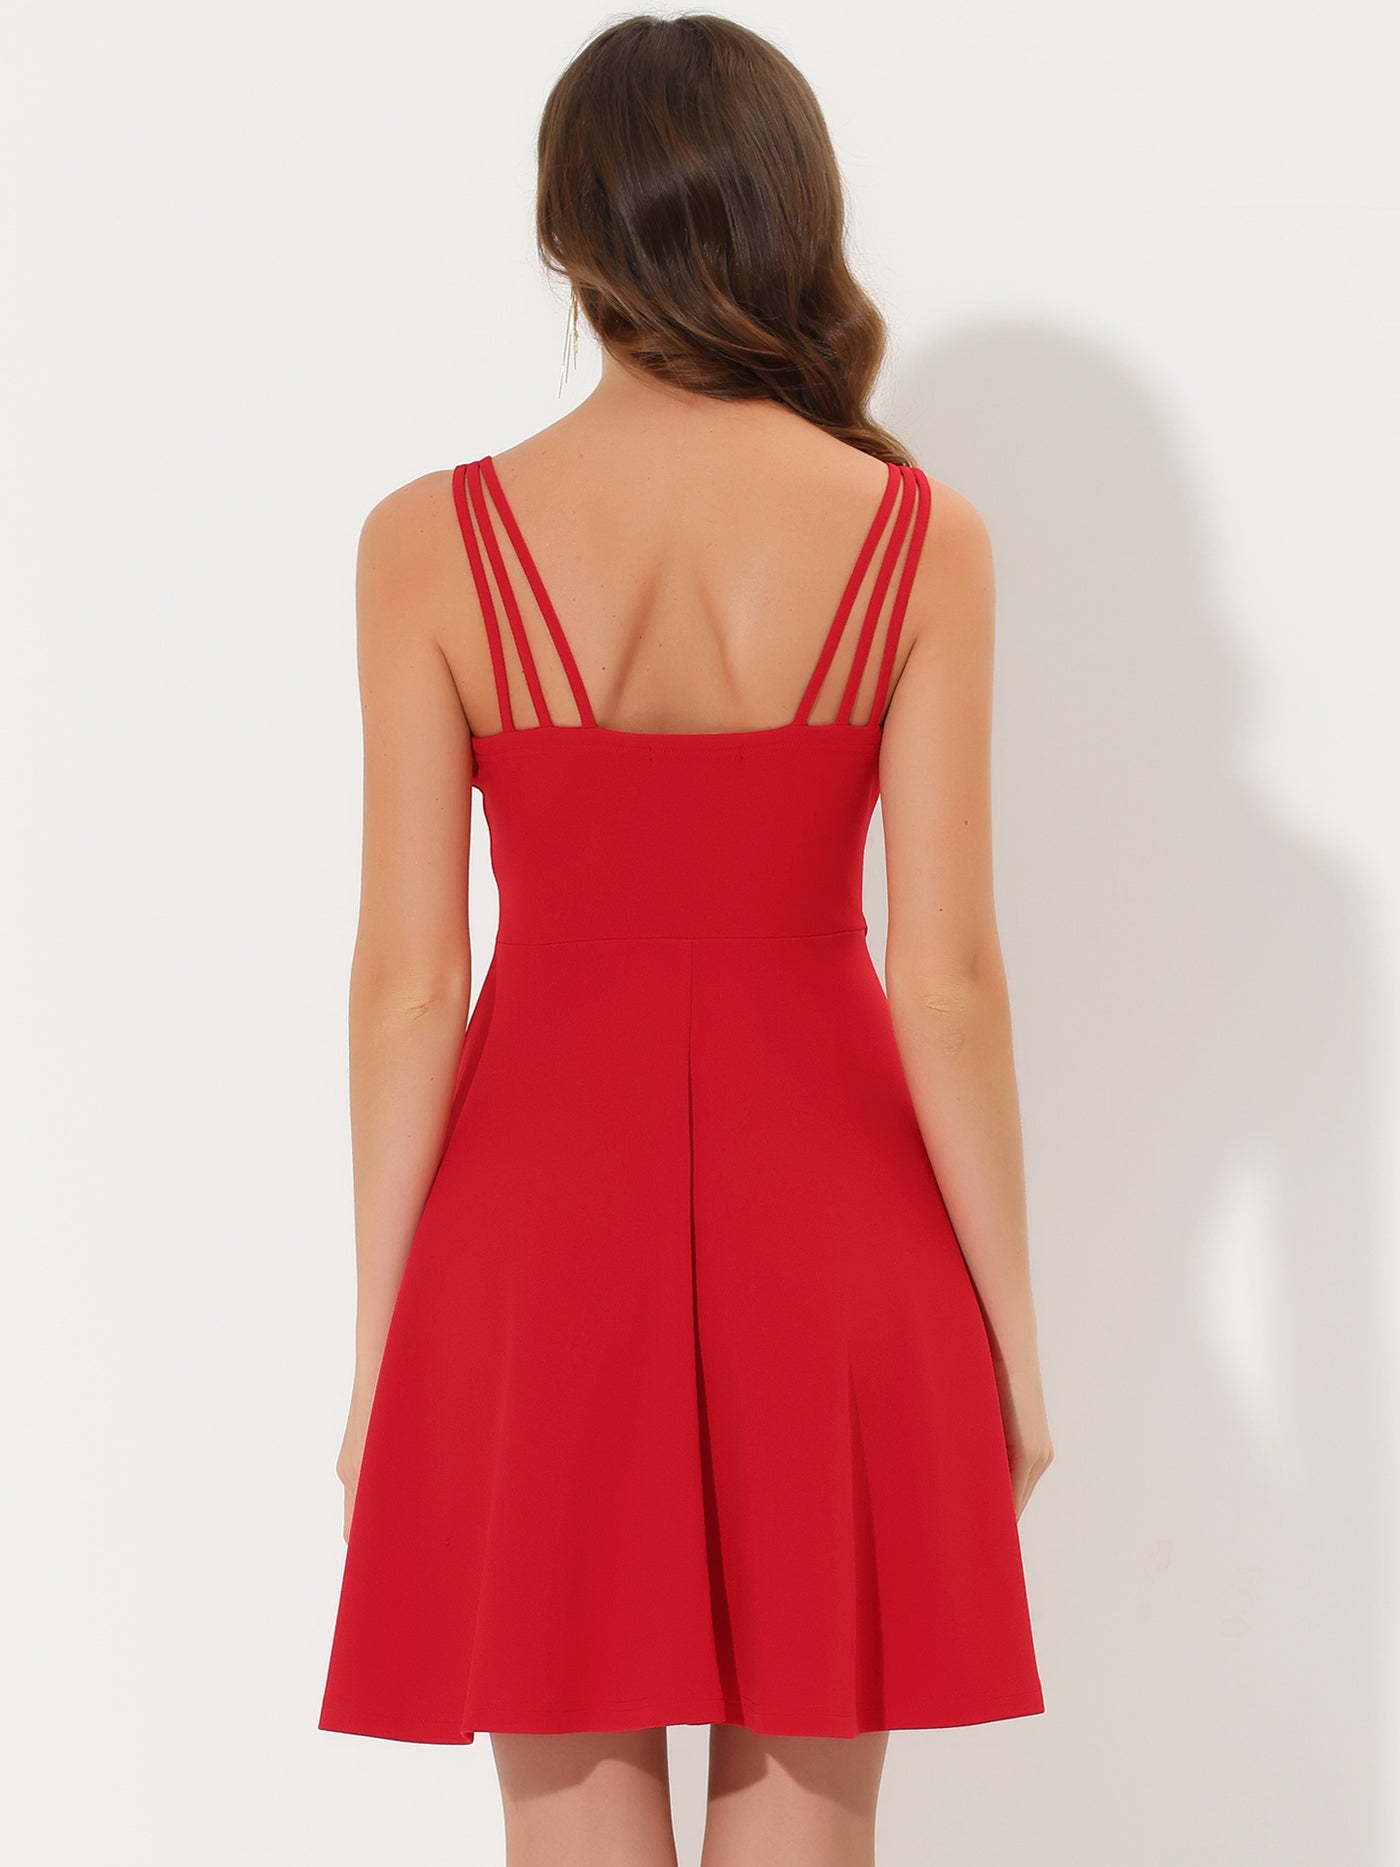 Allegra K Homecoming Sexy Backless Sleeveless Party Cocktail Dress